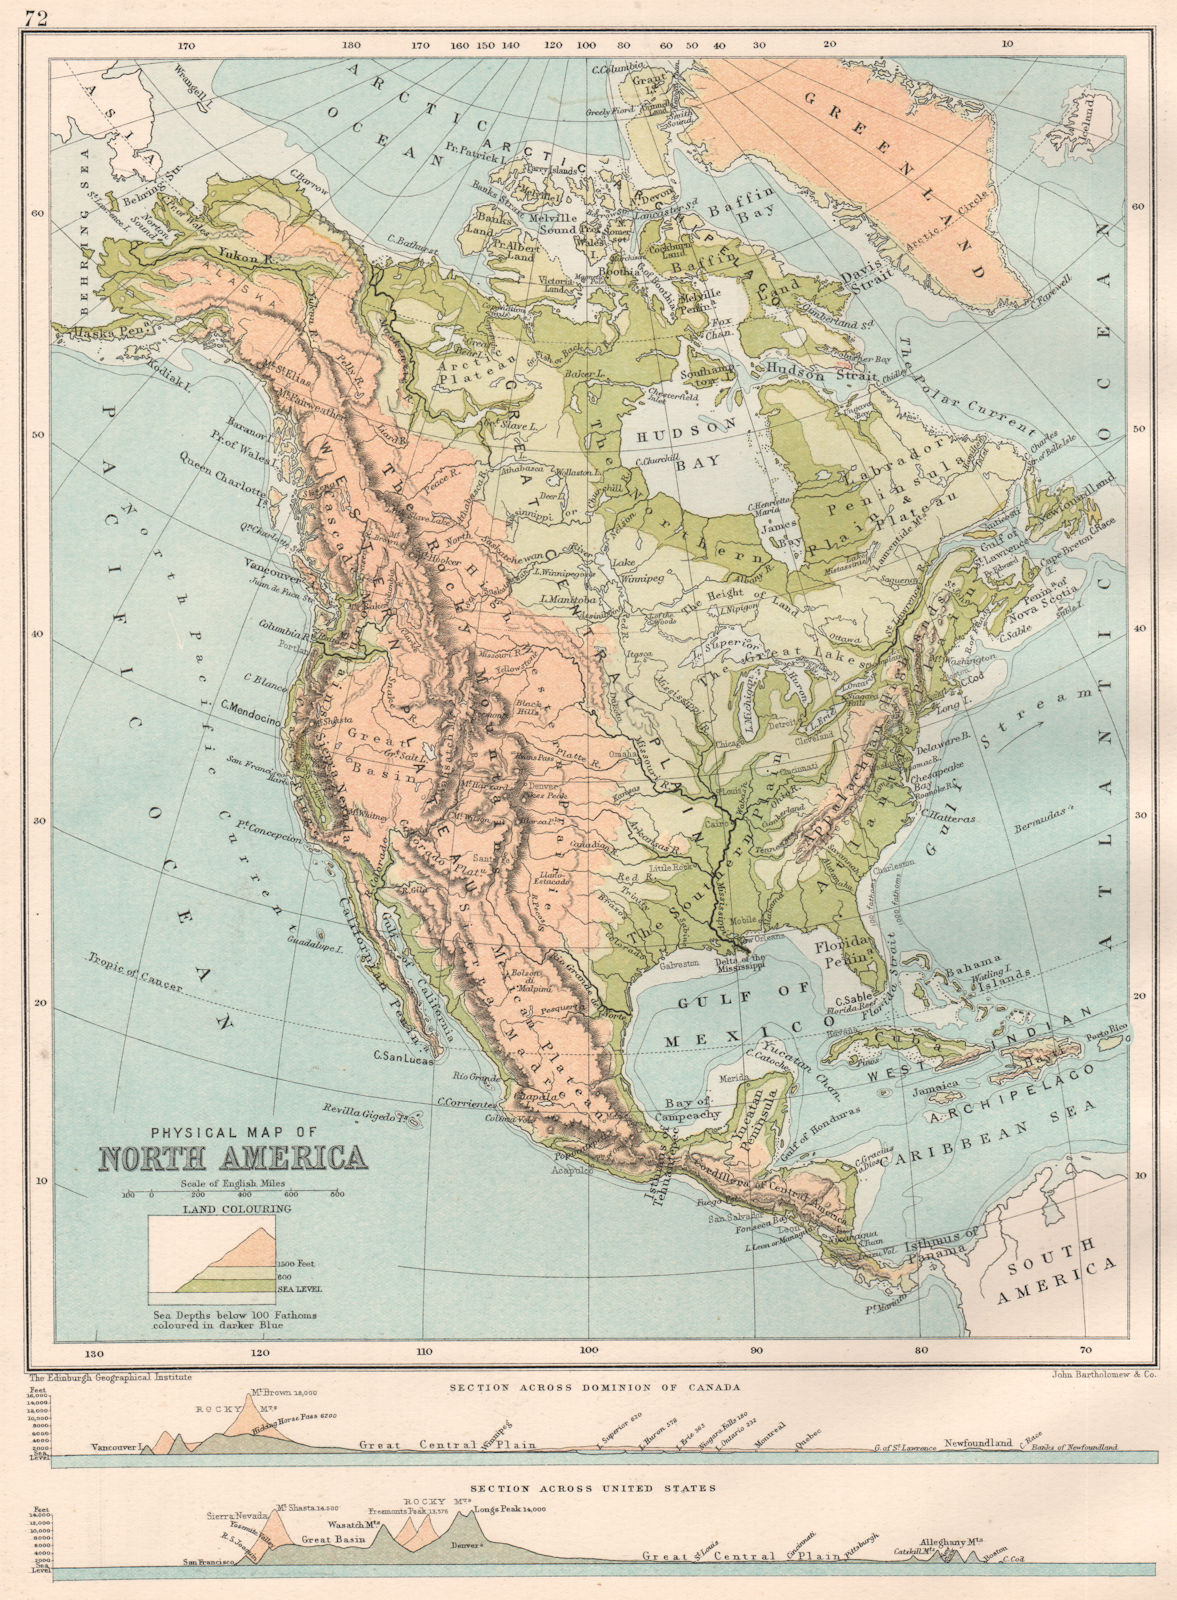 NORTH AMERICA PHYSICAL. Sections across the United States & Canada 1891 map